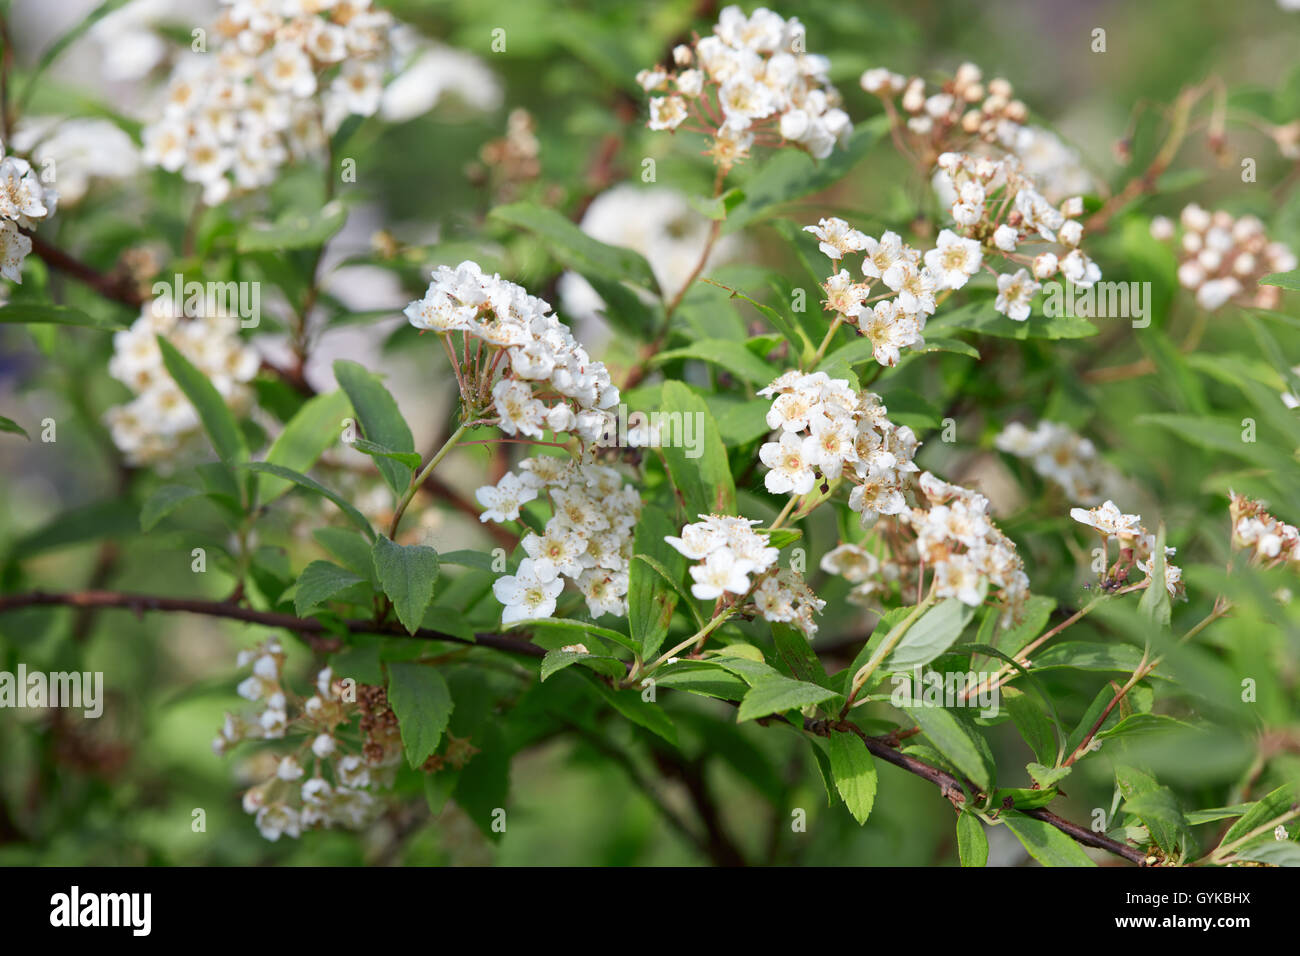 Spiraea vanhouttei, bridal wreath white flowers and leaves Stock Photo